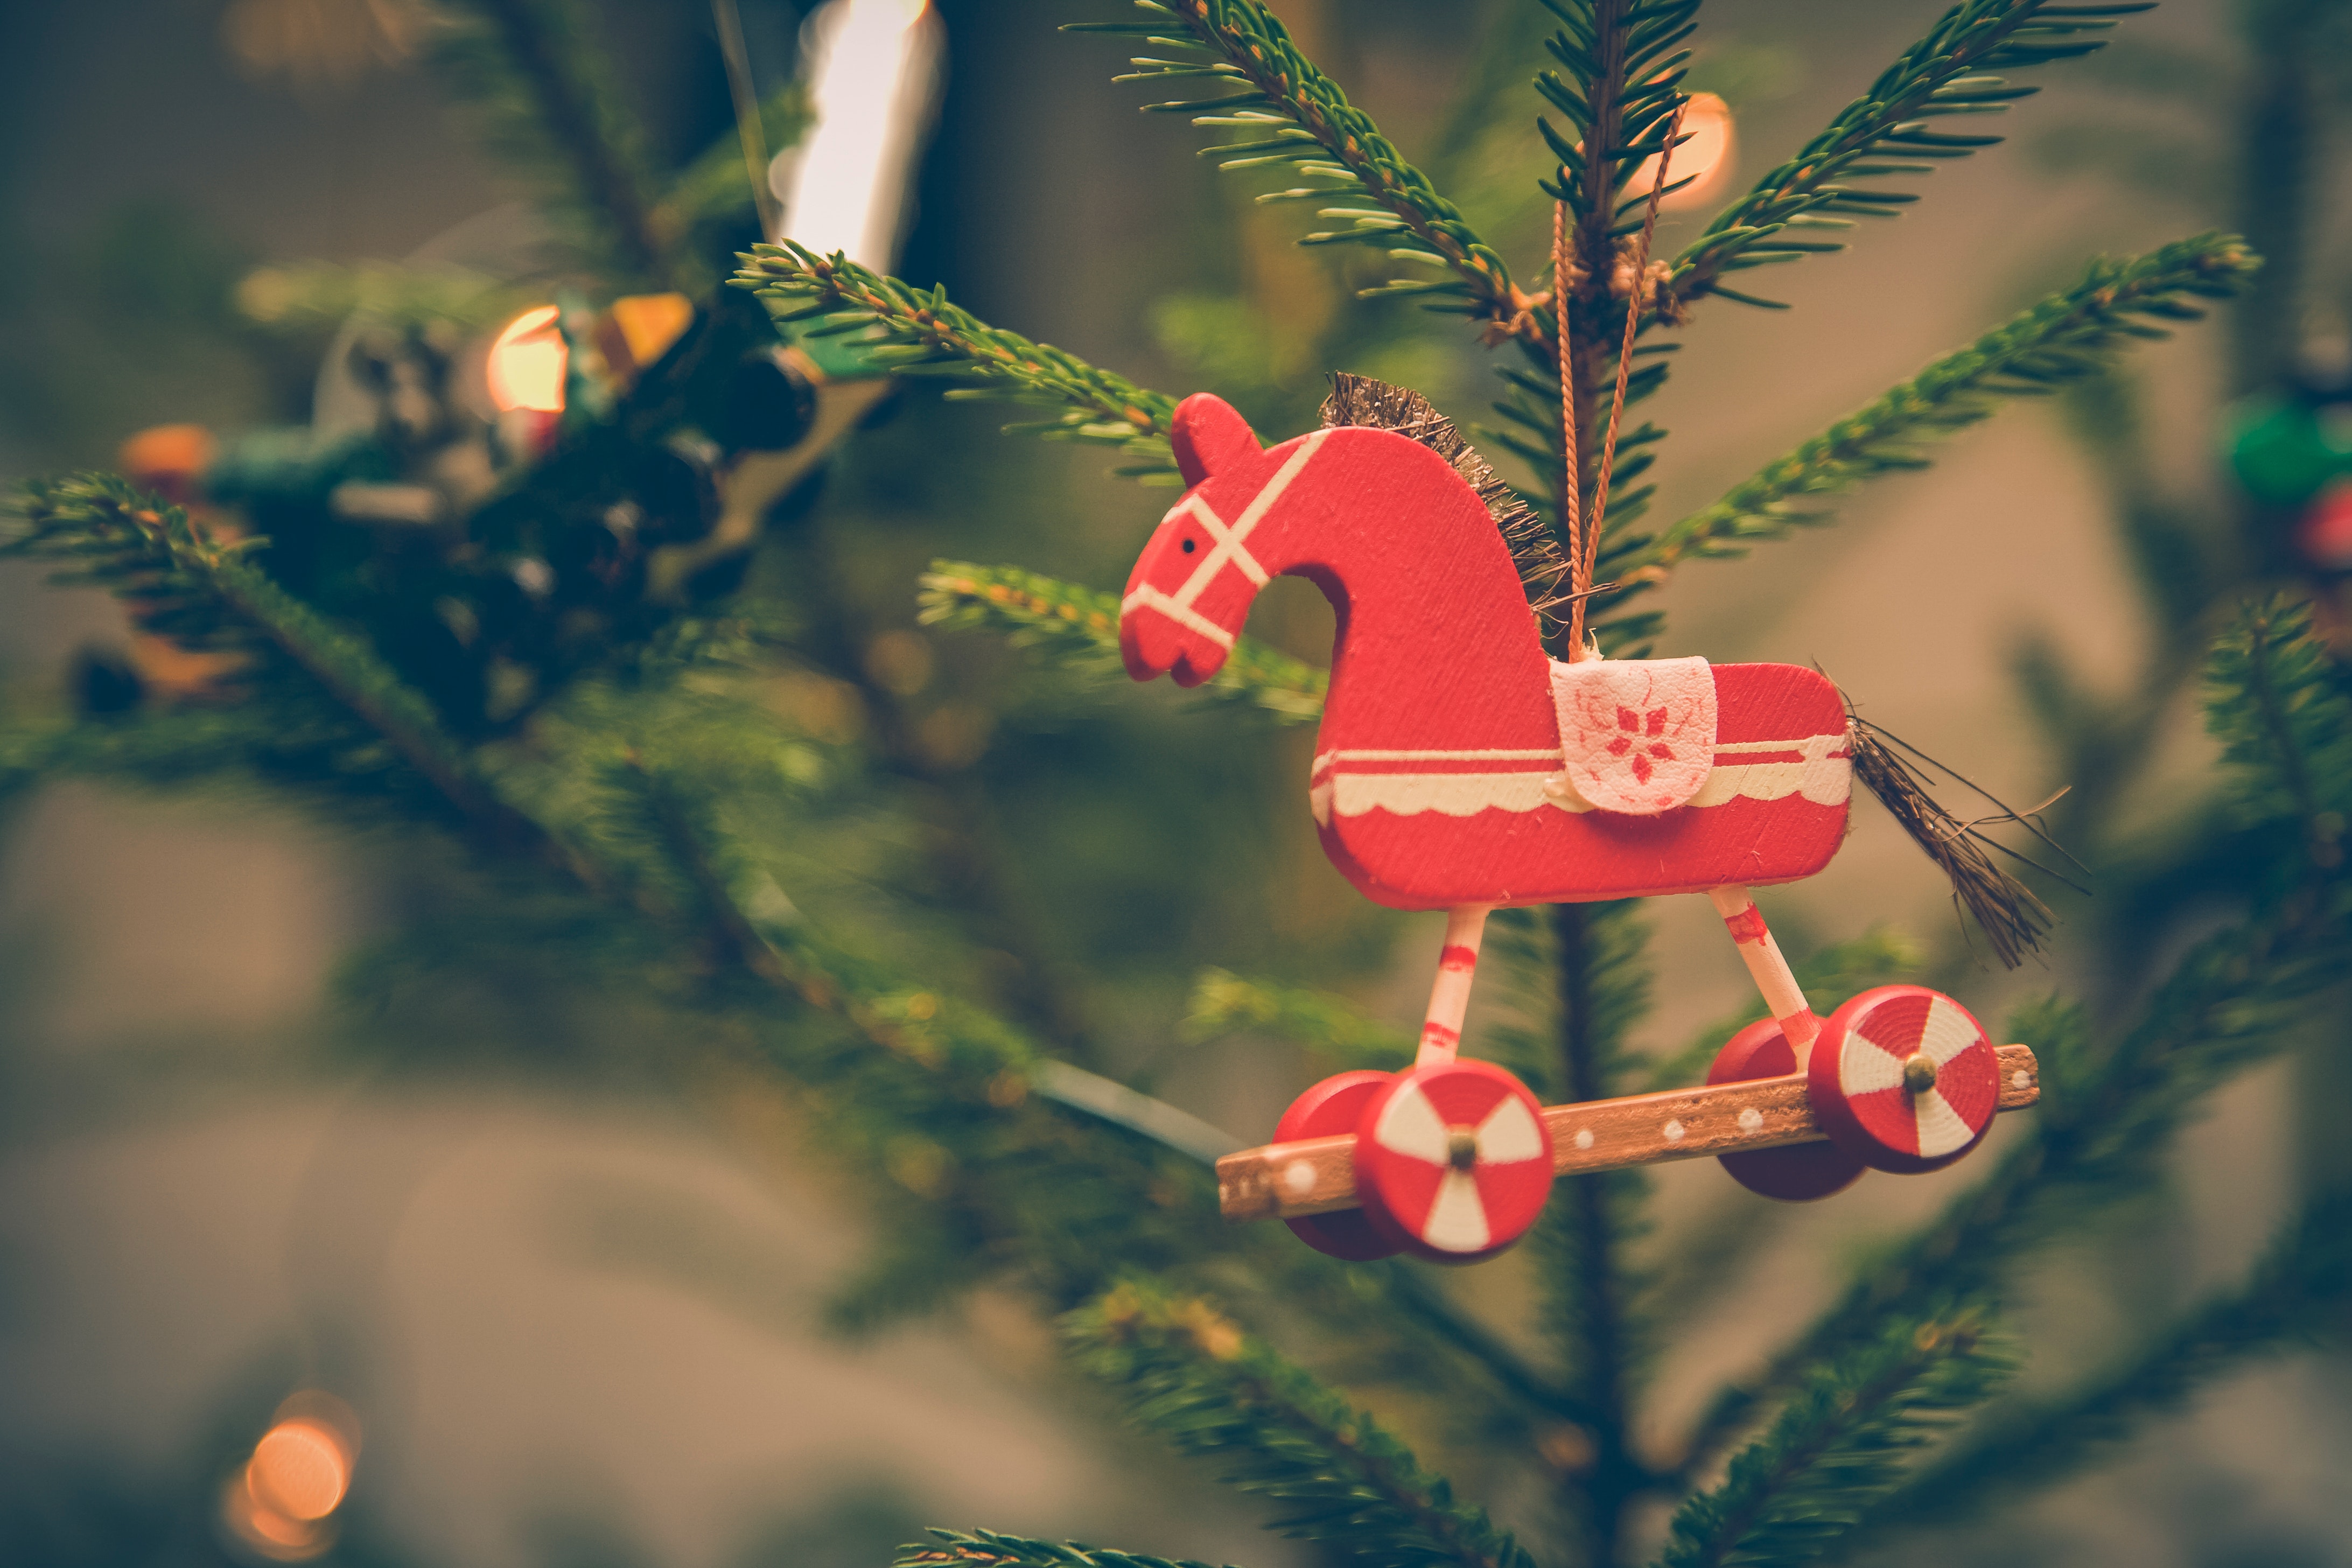 Brown and Red Horse Decor Hanged on Christmas Tree, Blur, Pine, Wood, Vintage, HQ Photo